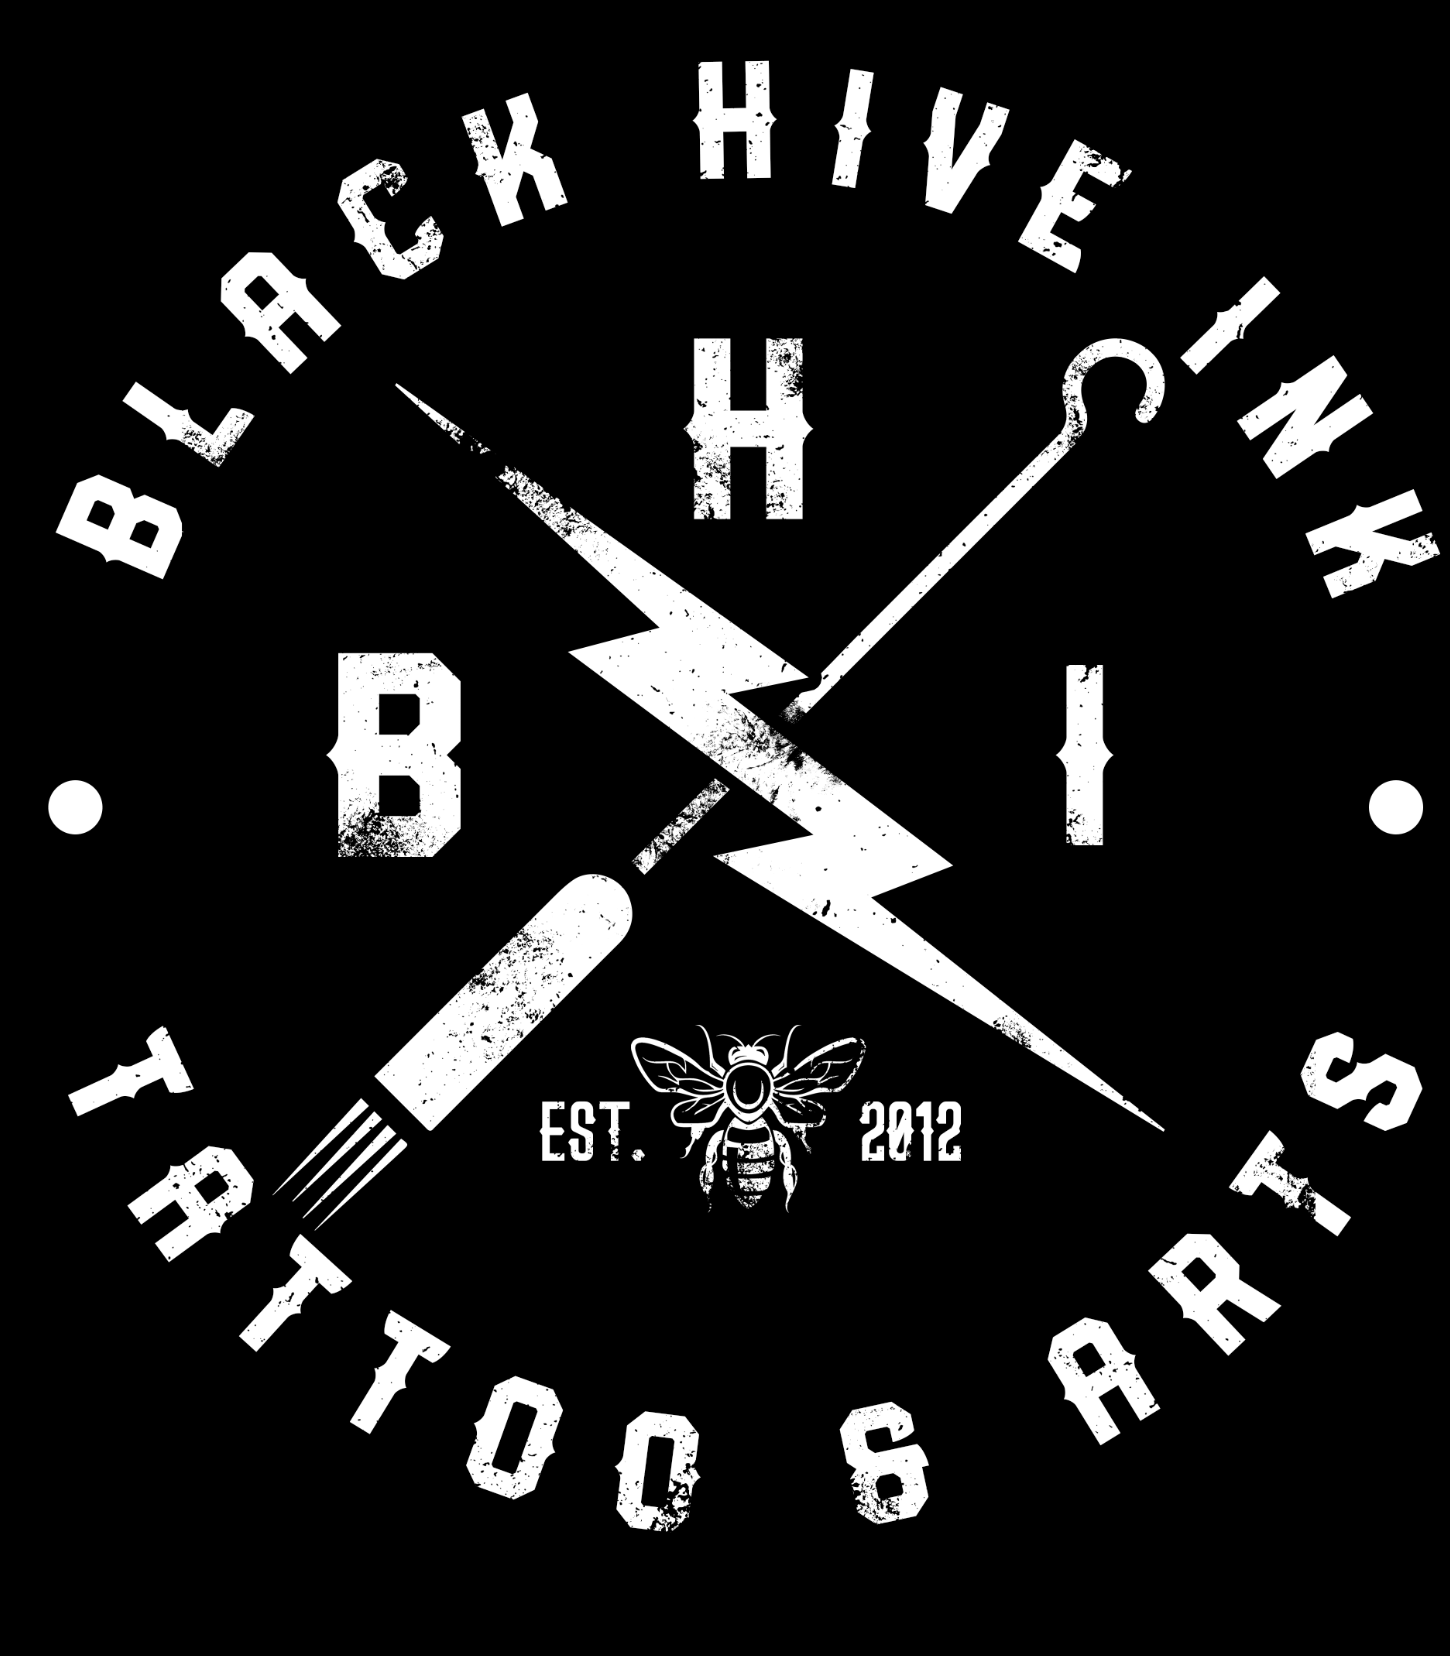 Black Hive Ink and Arts